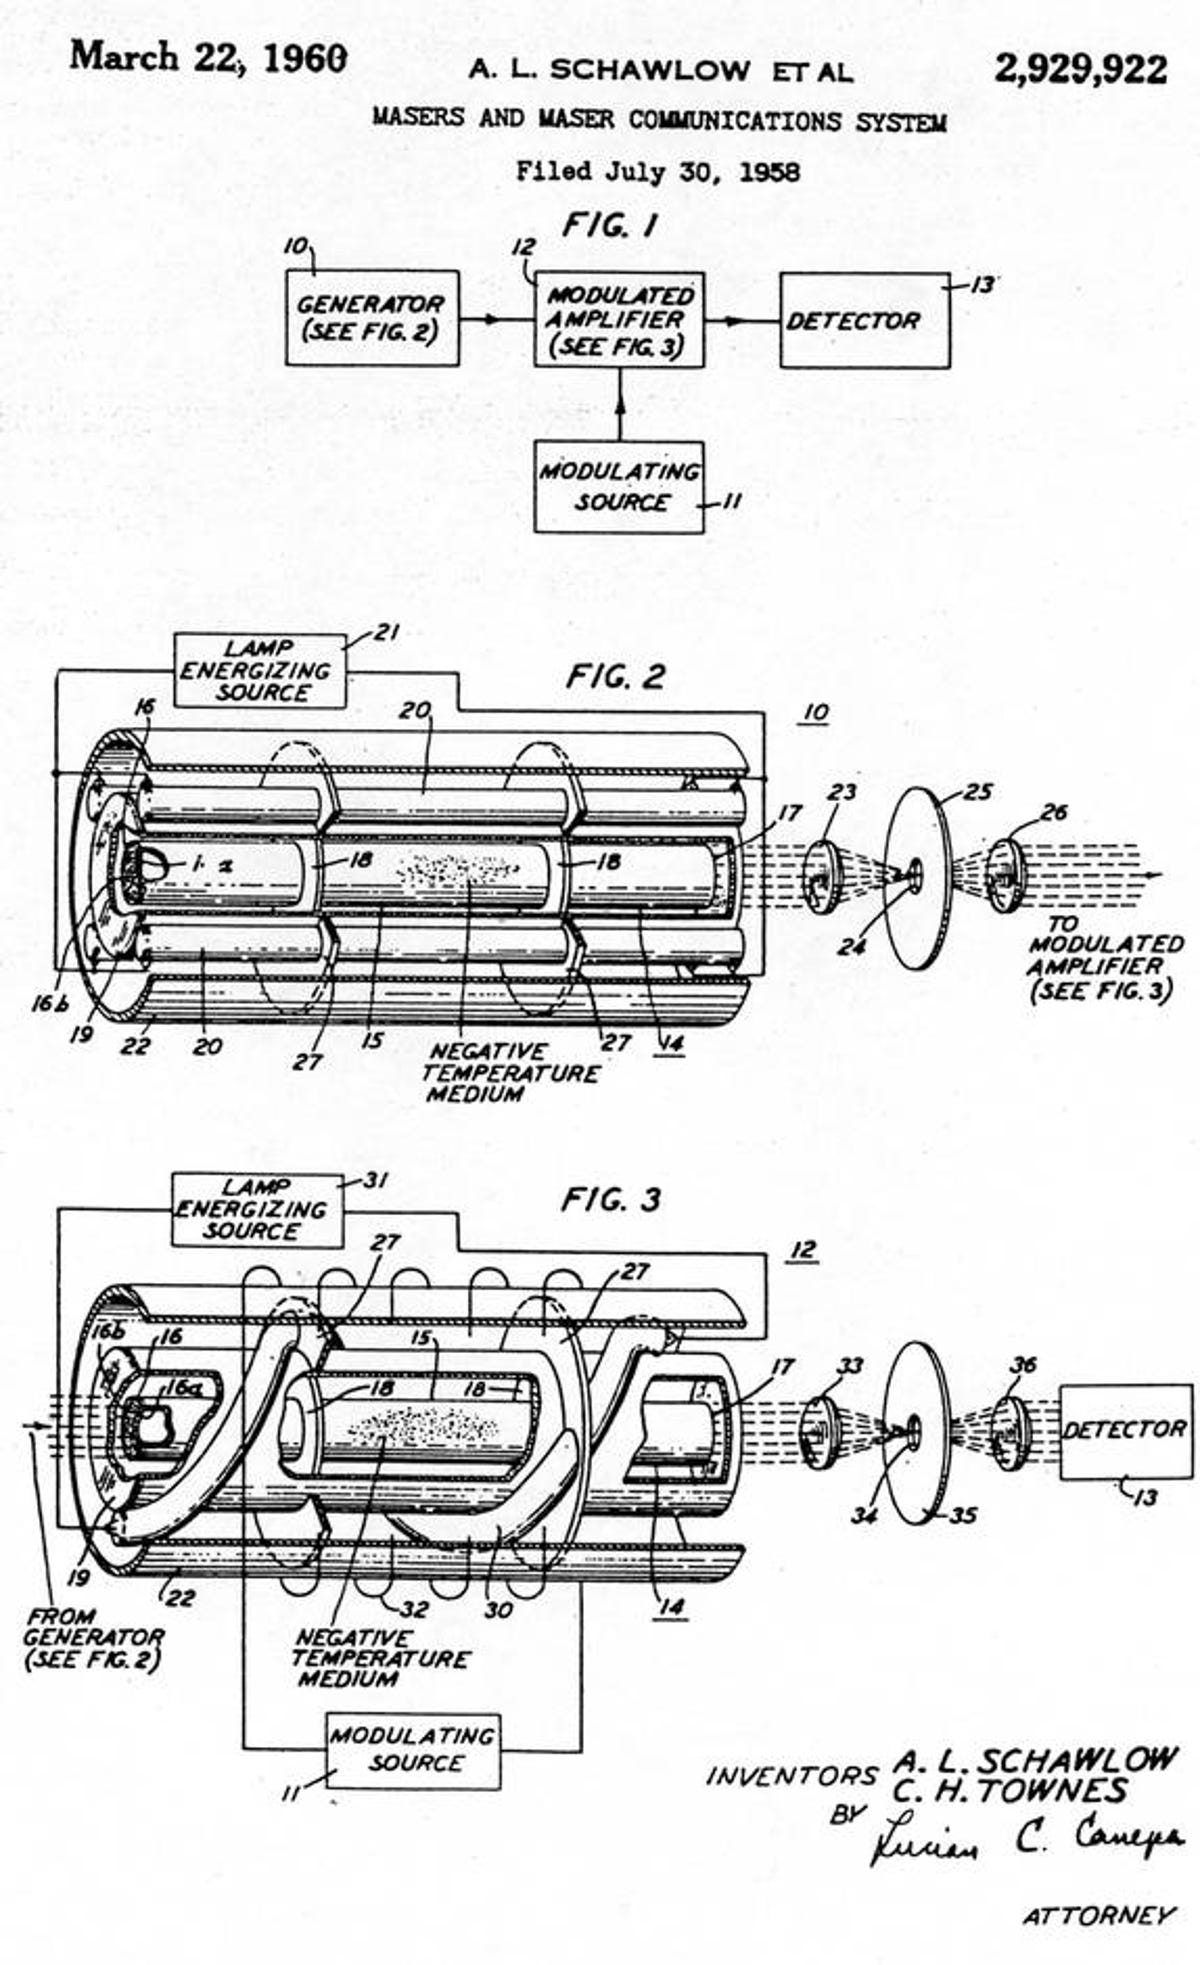 Bell_Labs_patent_application.jpg